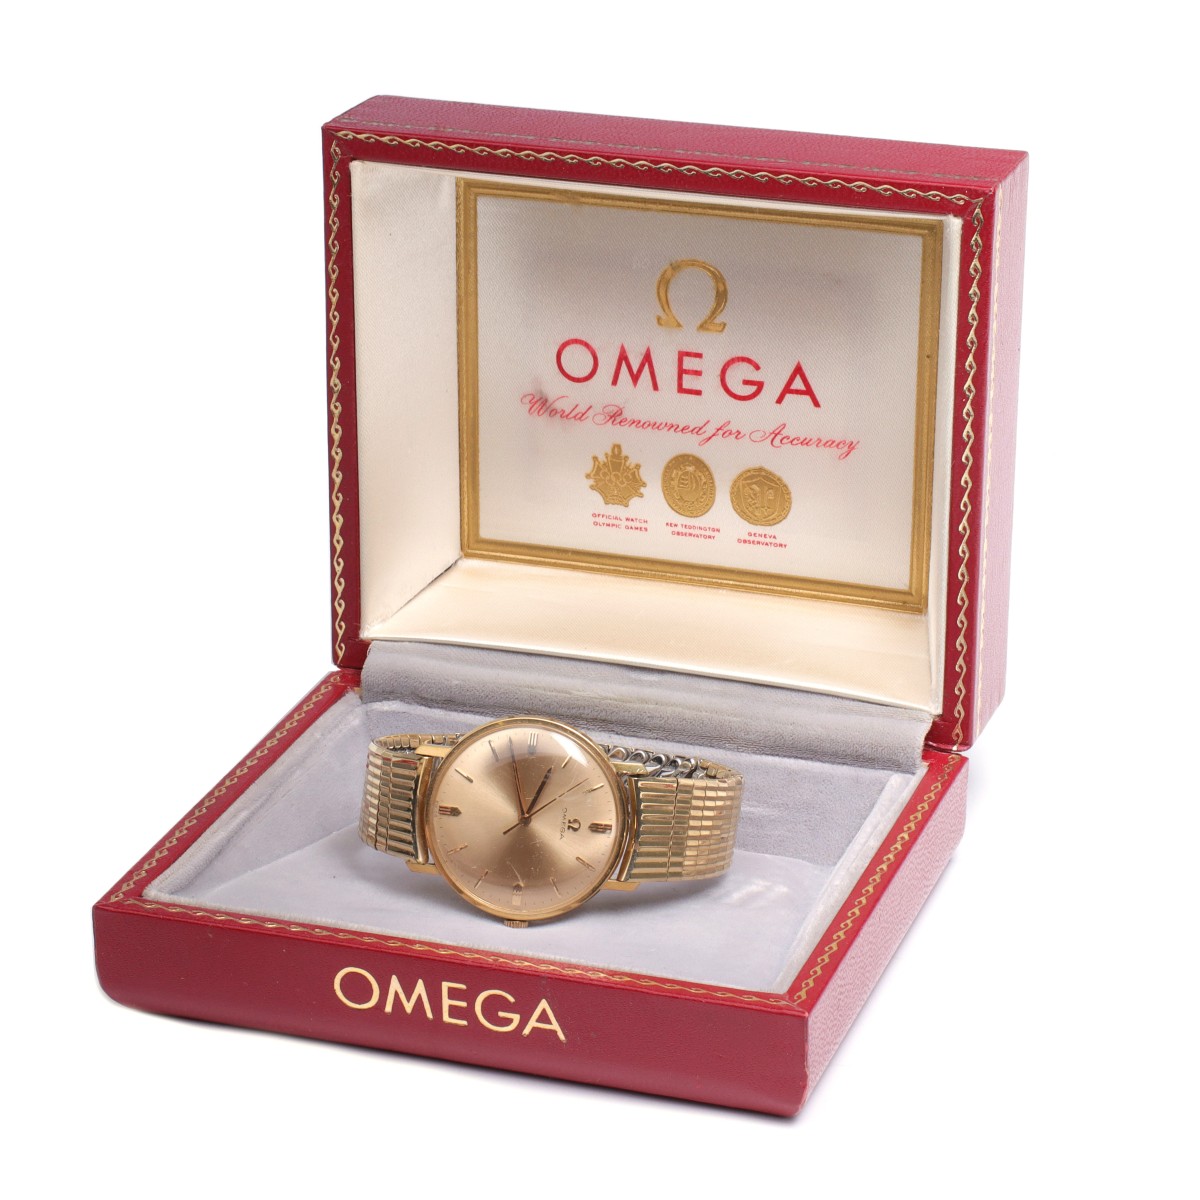 AN OMEGA 18K GOLD GENT'S WRIST WATCH IN ORIG BOX